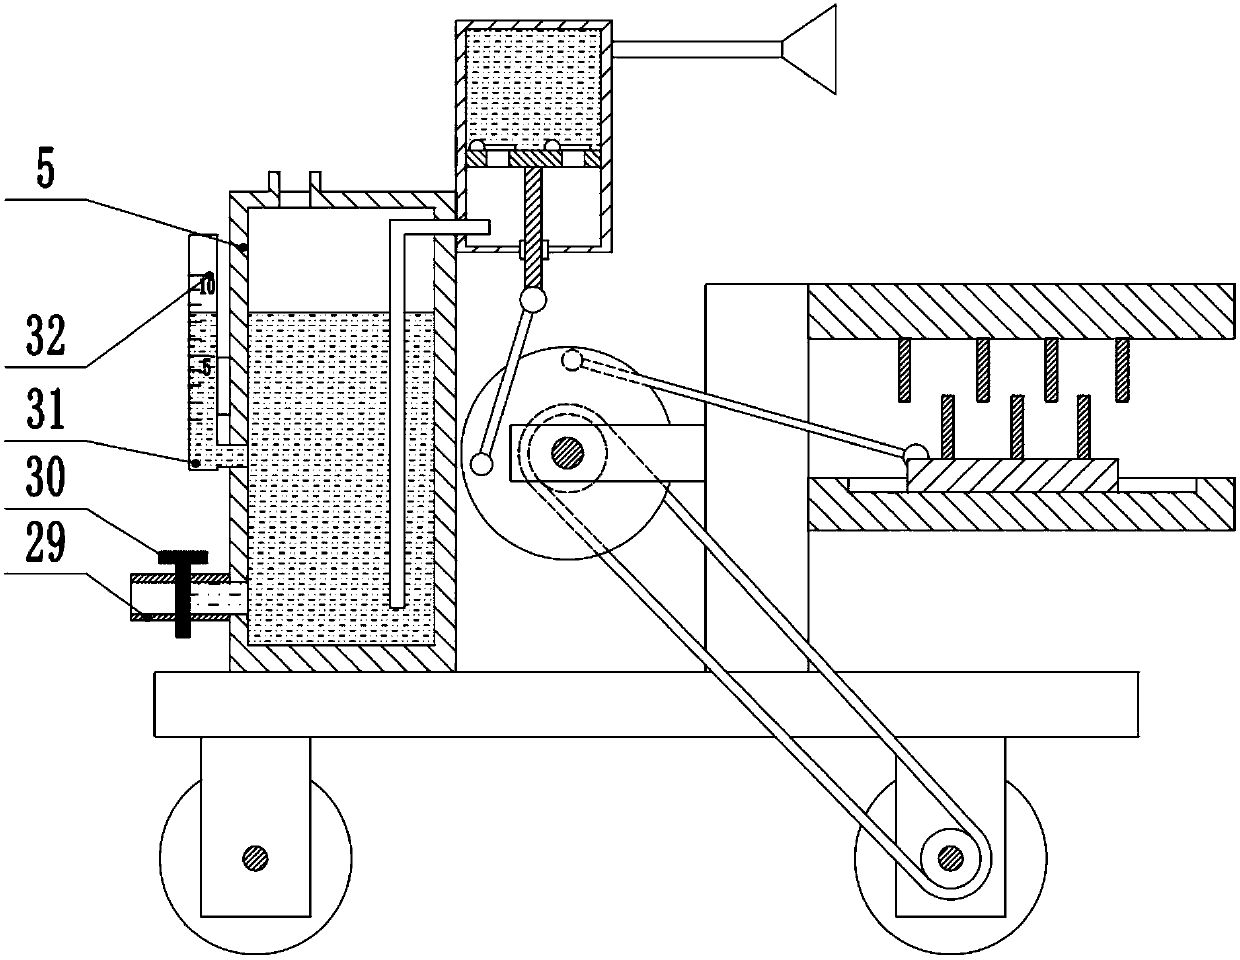 Trimming-watering integrated herb plantation device